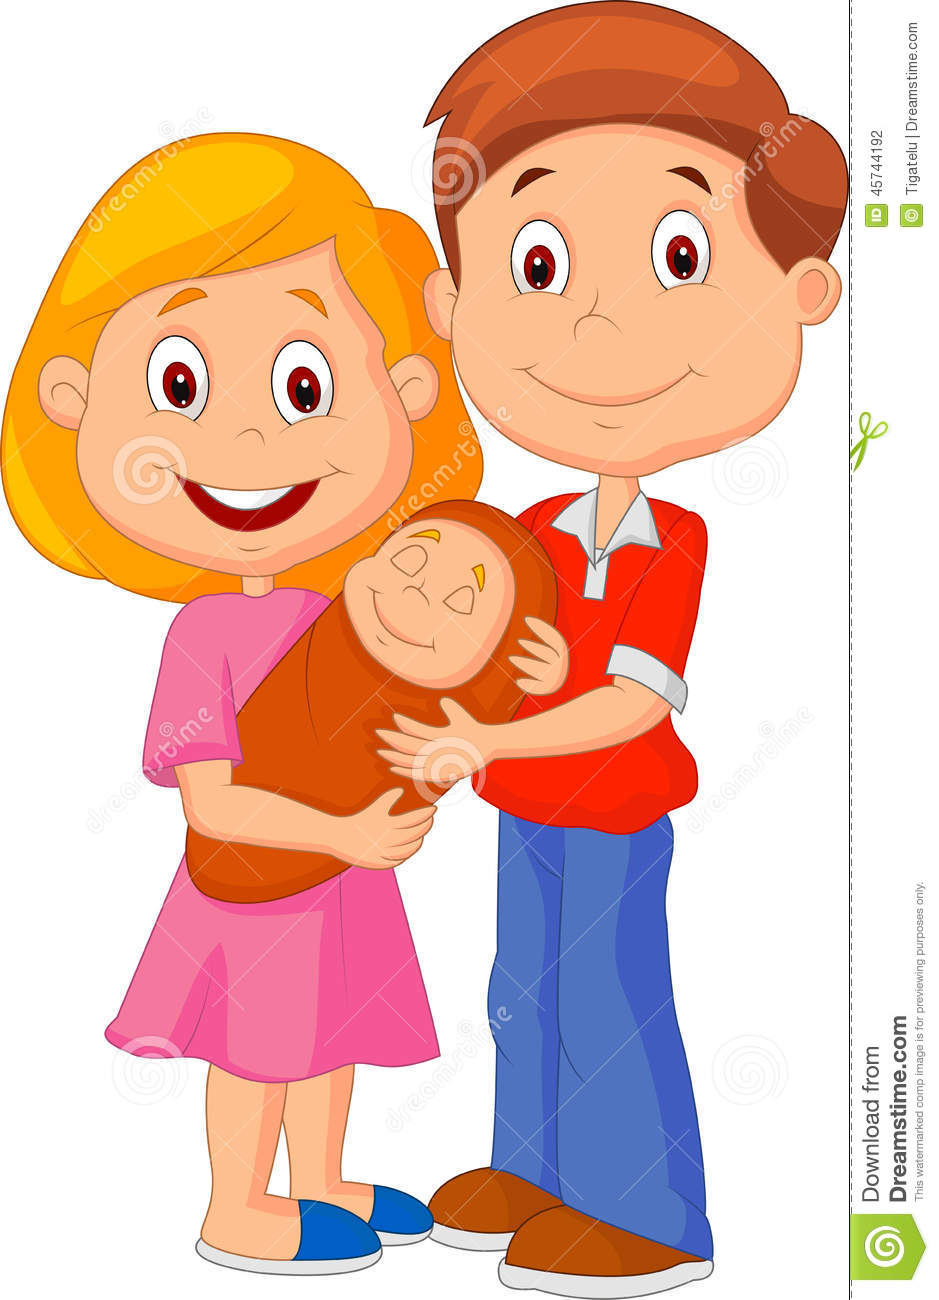 Cartoon Young Adult Couple Tenderly Embracing Their Baby Stock Vector